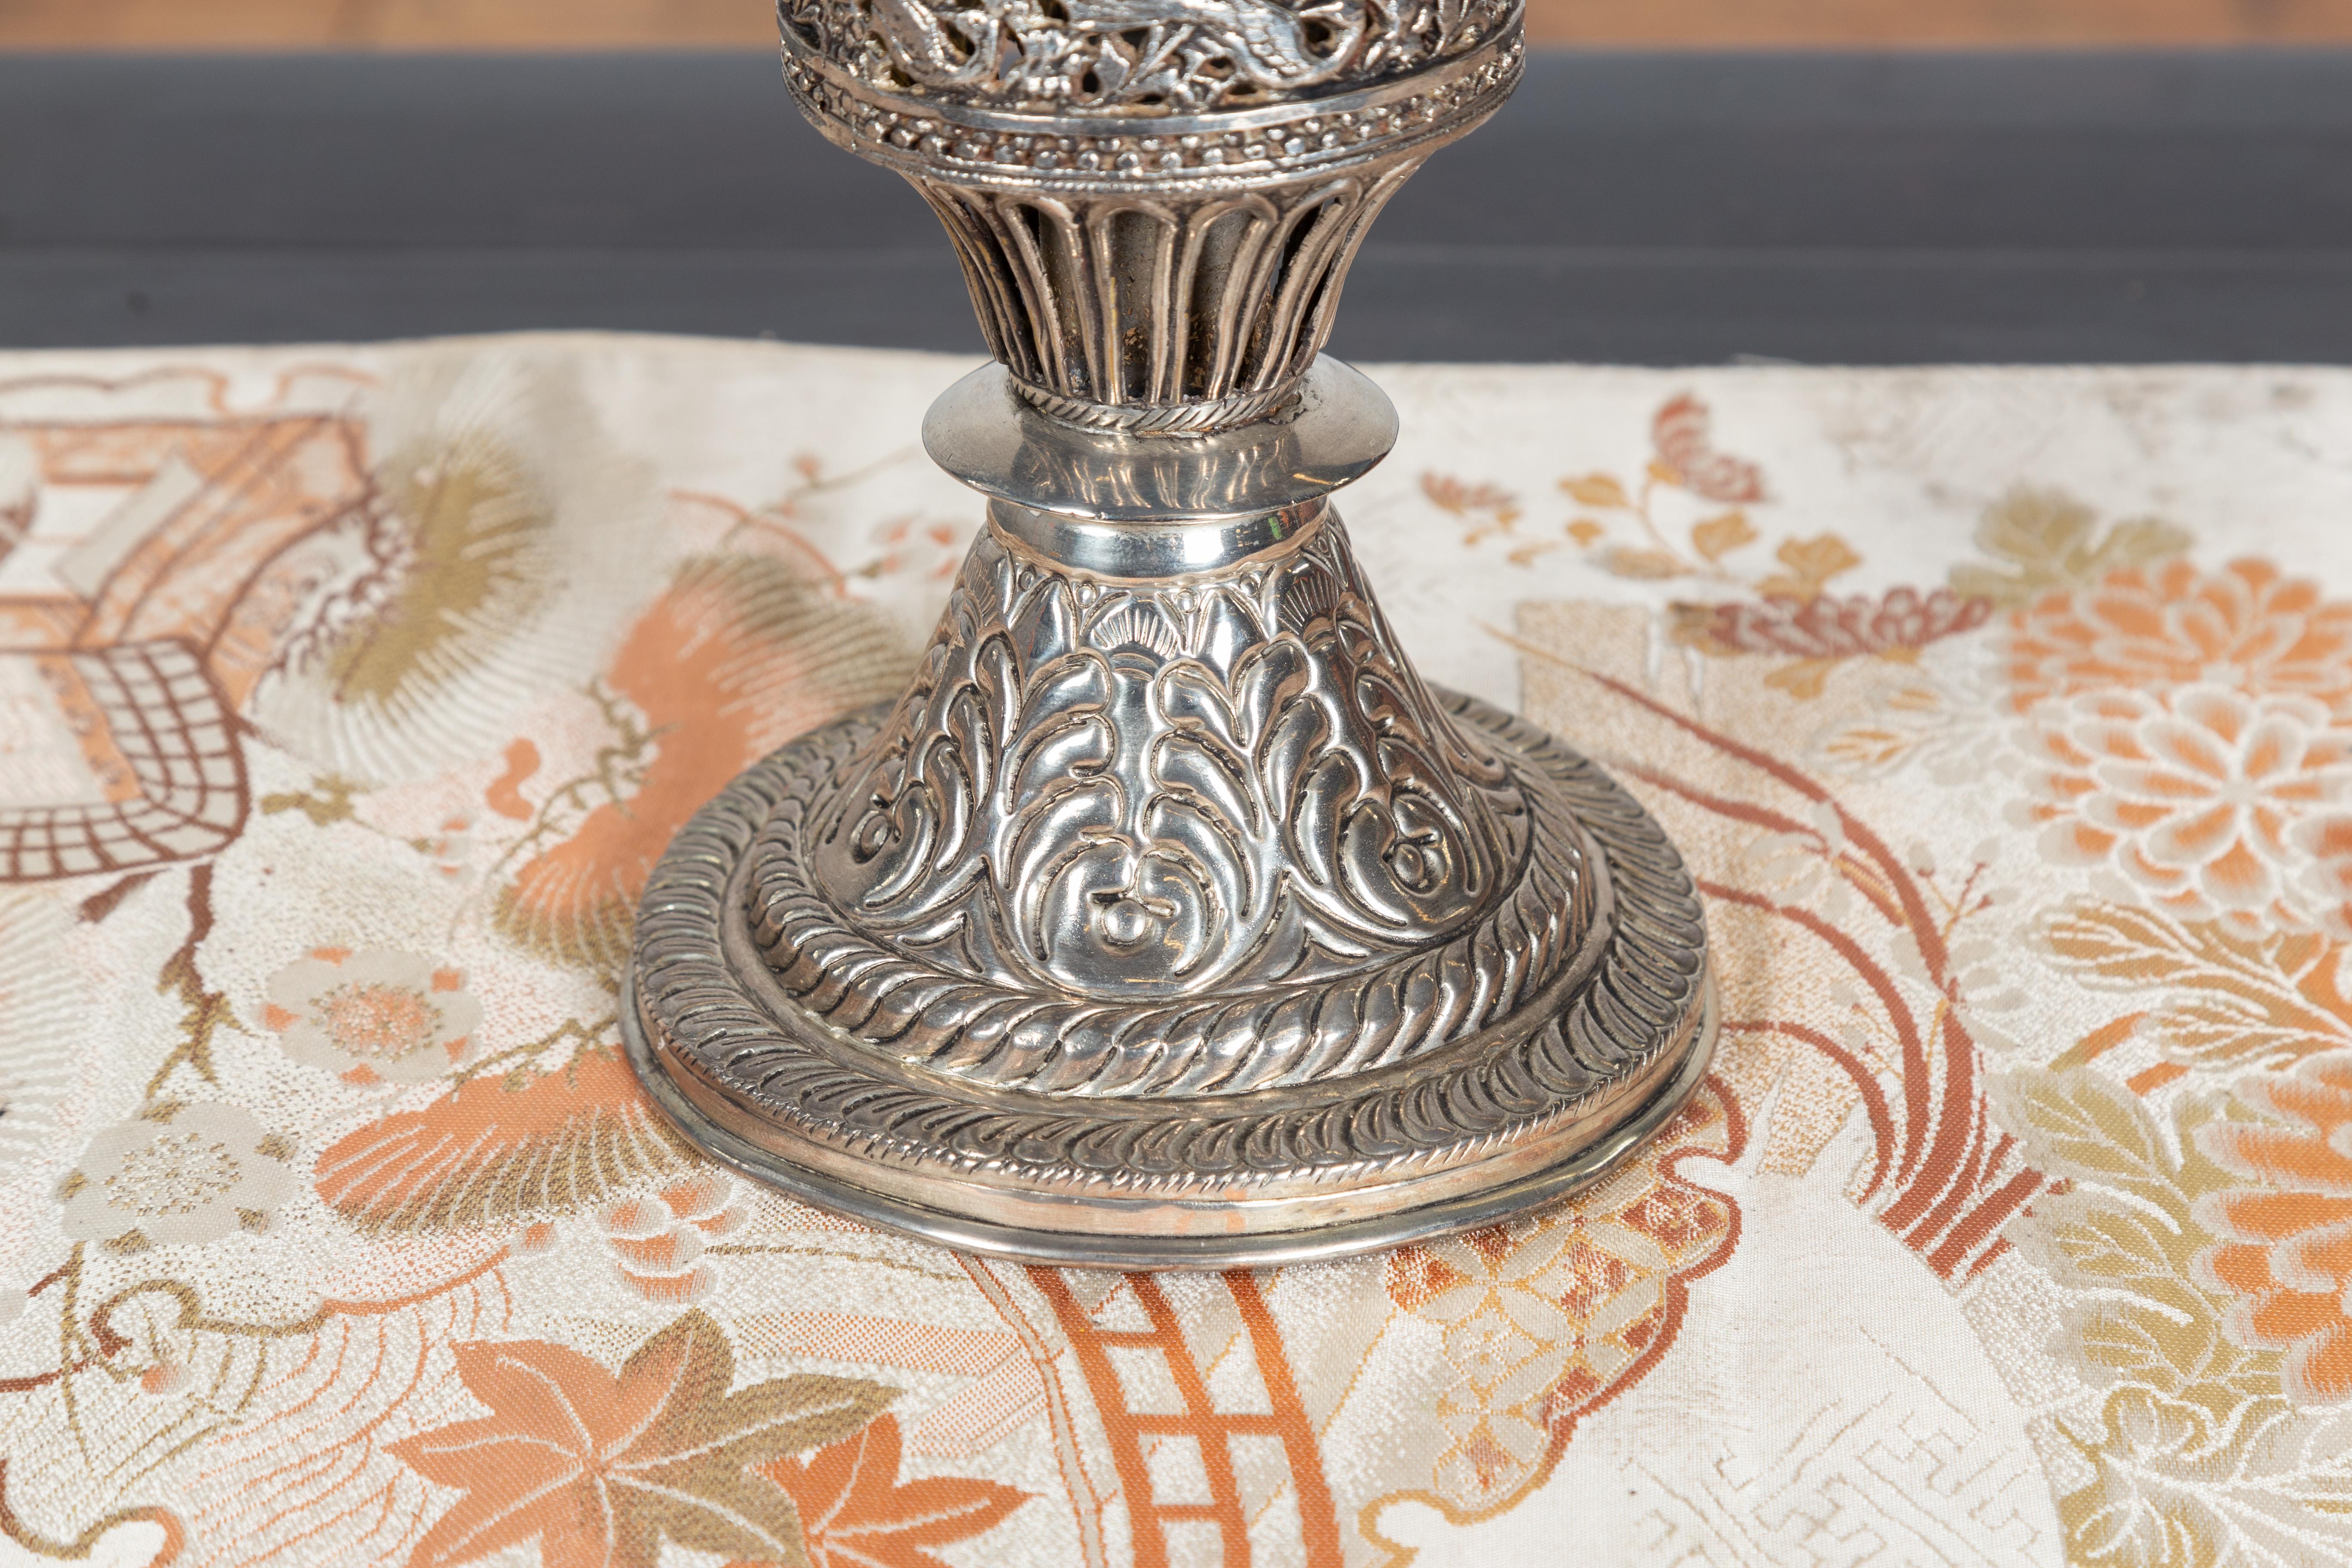 Indian Vintage Silverplate Brass Covered Candle Holder with Open Fretwork 3